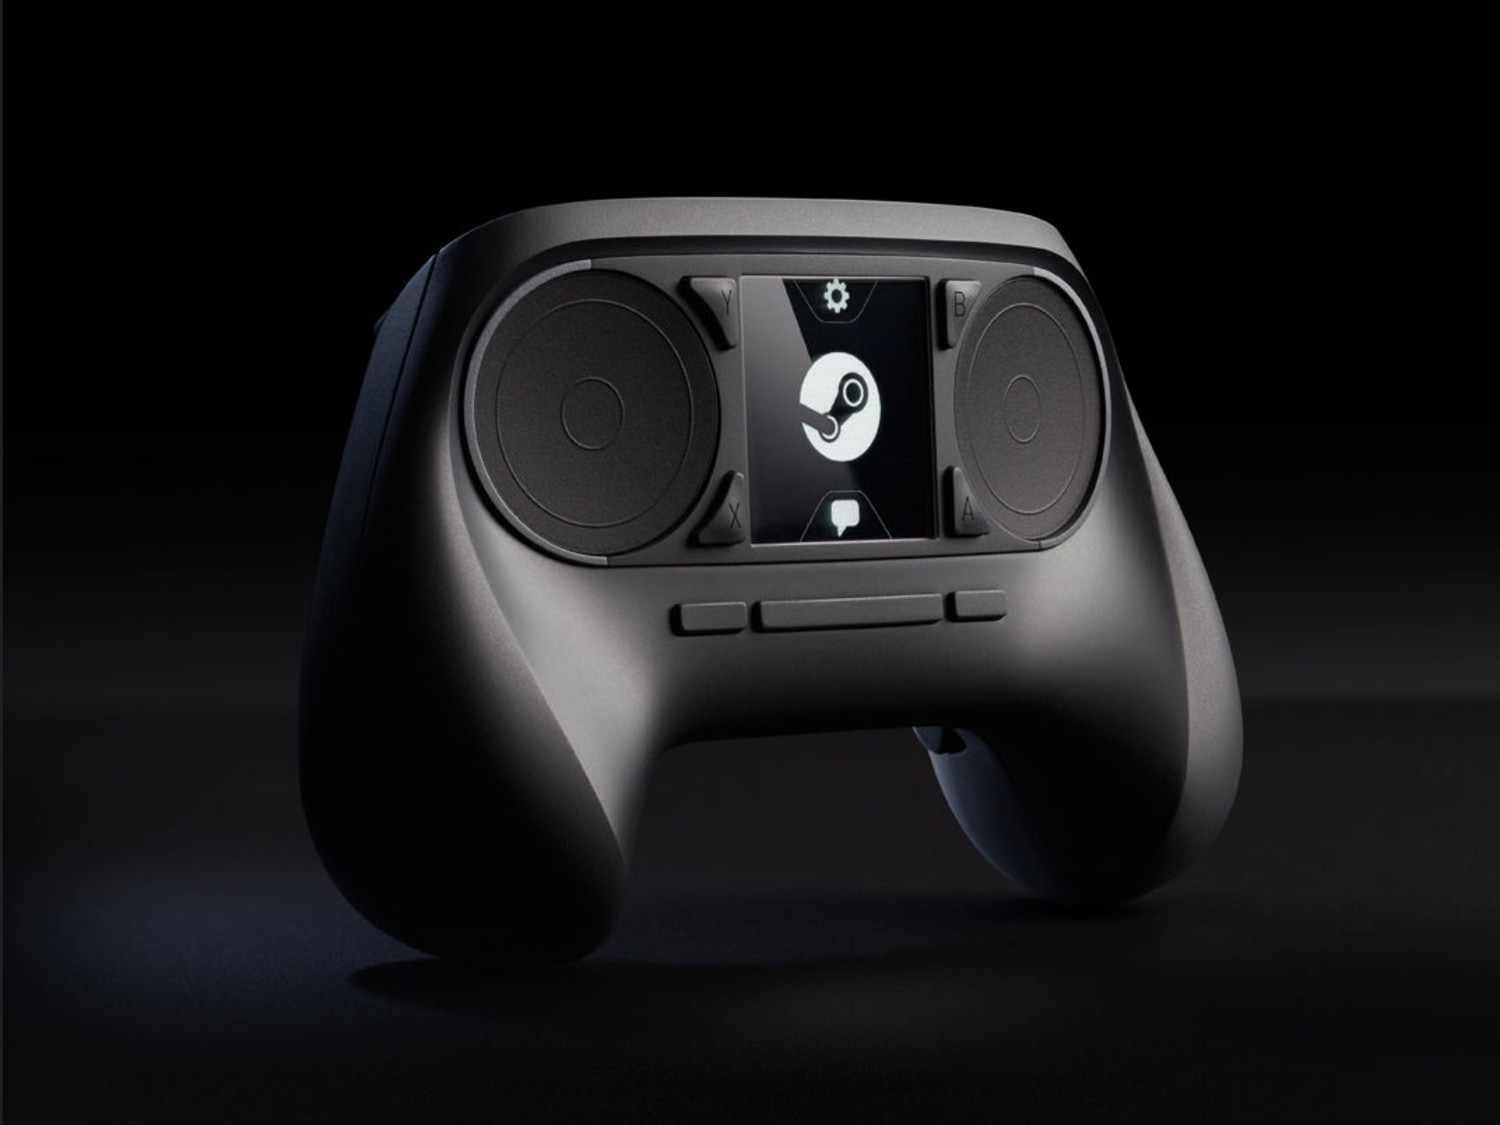 DAE think that Valve will go back to a living room console again? Love my  Steam Machine and Steam controller when it came out but I know it was a  failed launch.